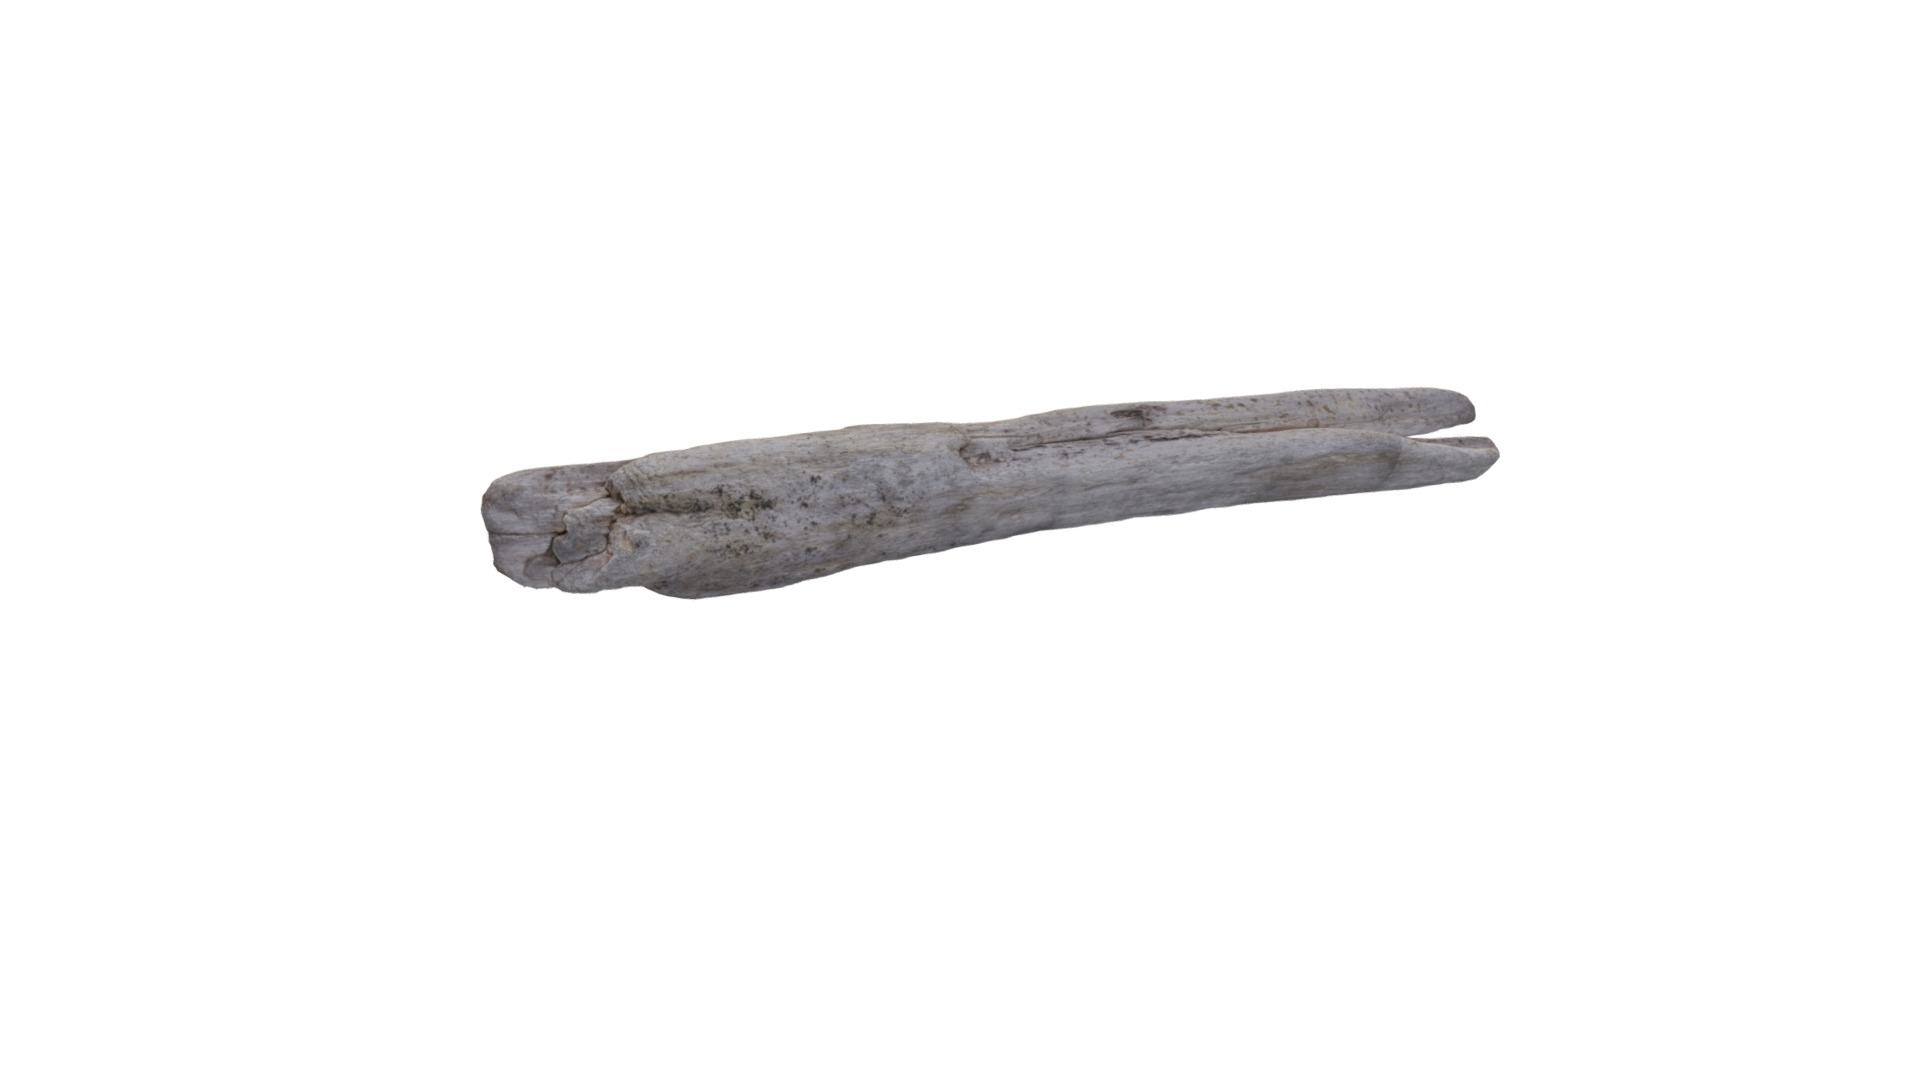 3D model Woodchuck - This is a 3D model of the Woodchuck. The 3D model is about a long wooden spoon.